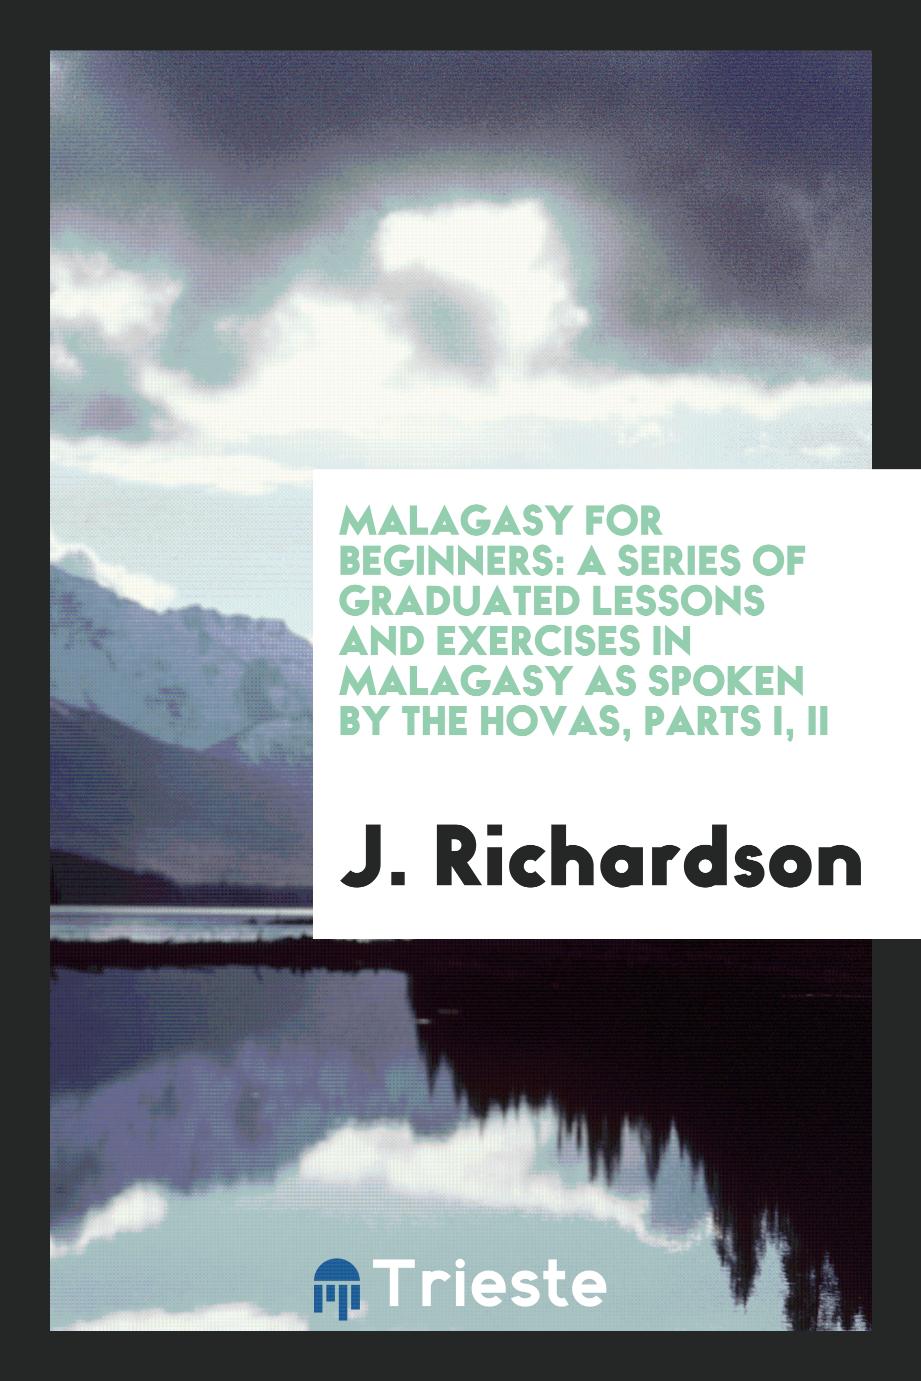 Malagasy for Beginners: A Series of Graduated Lessons and Exercises in Malagasy as Spoken by the Hovas, Parts I, II